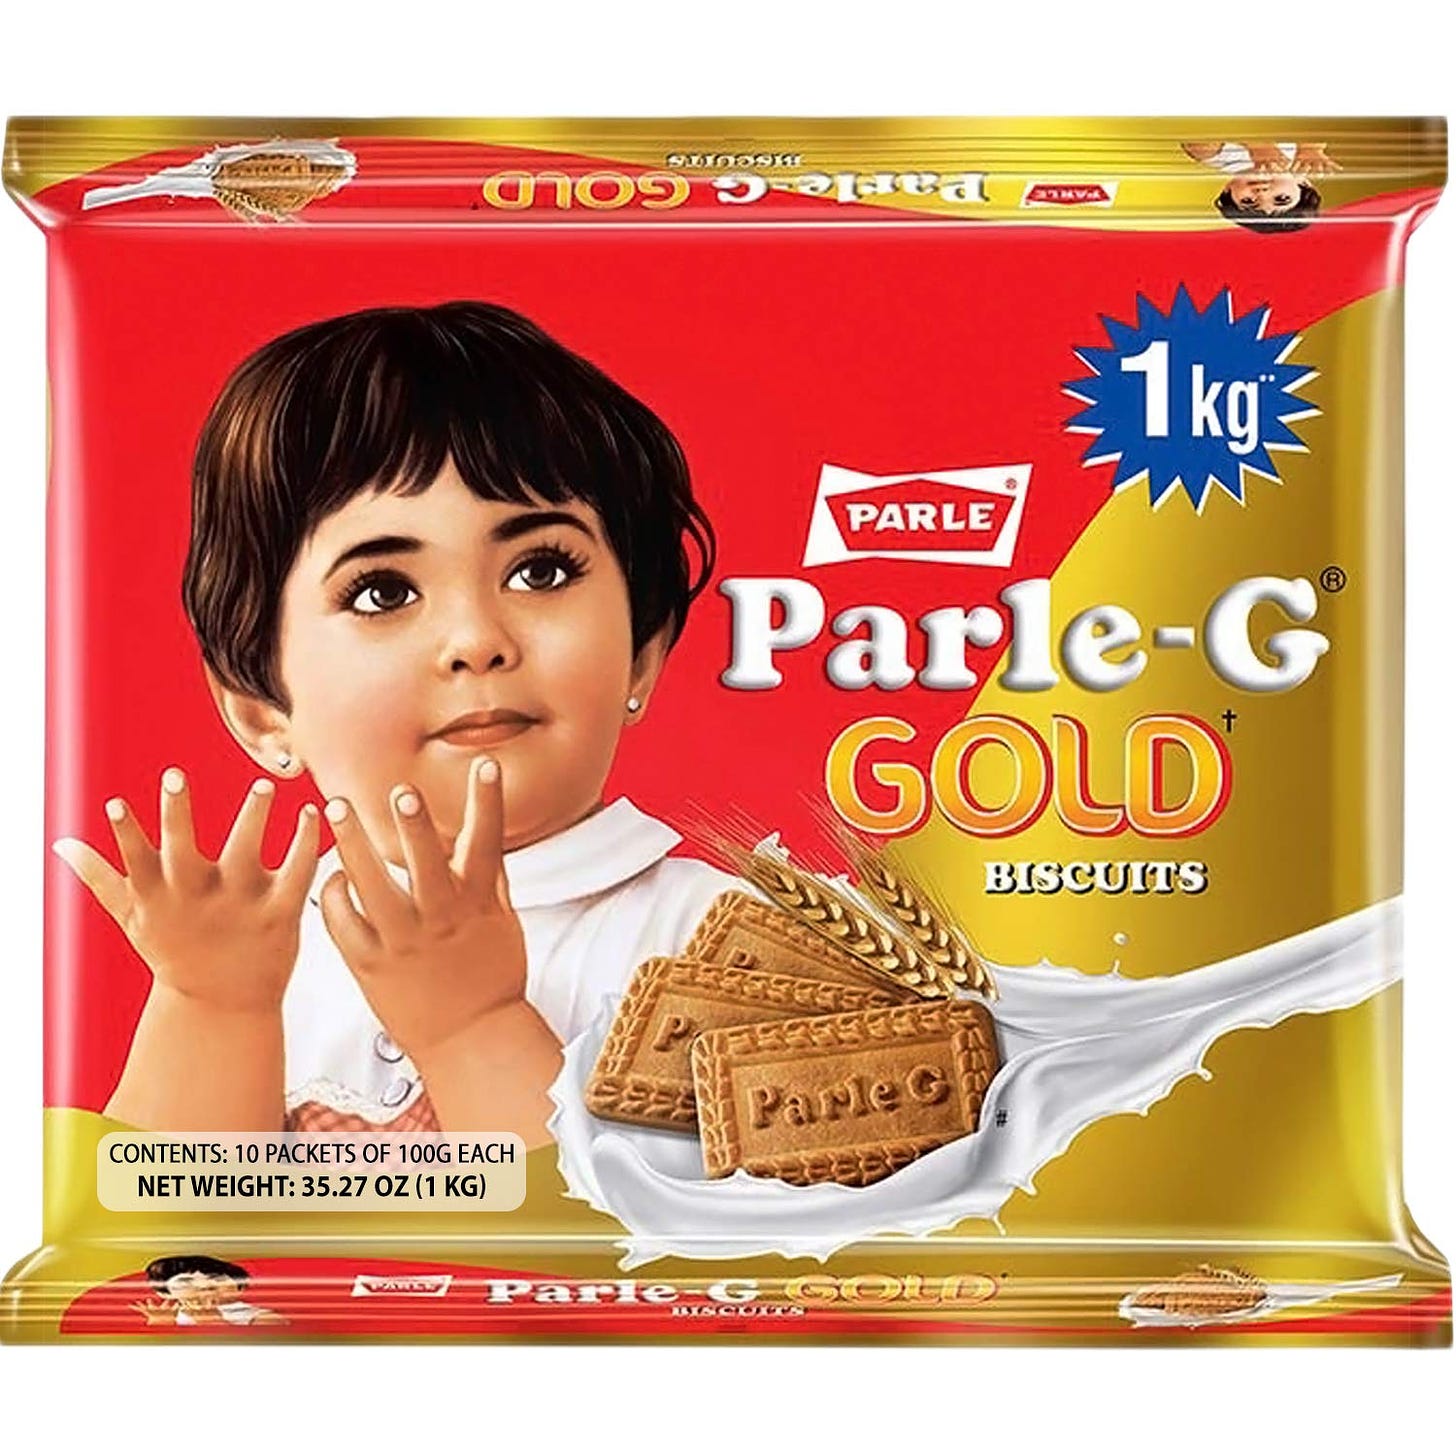 Parle-G Gold Biscuits - 10 Packs of 100g each UK | Ubuy